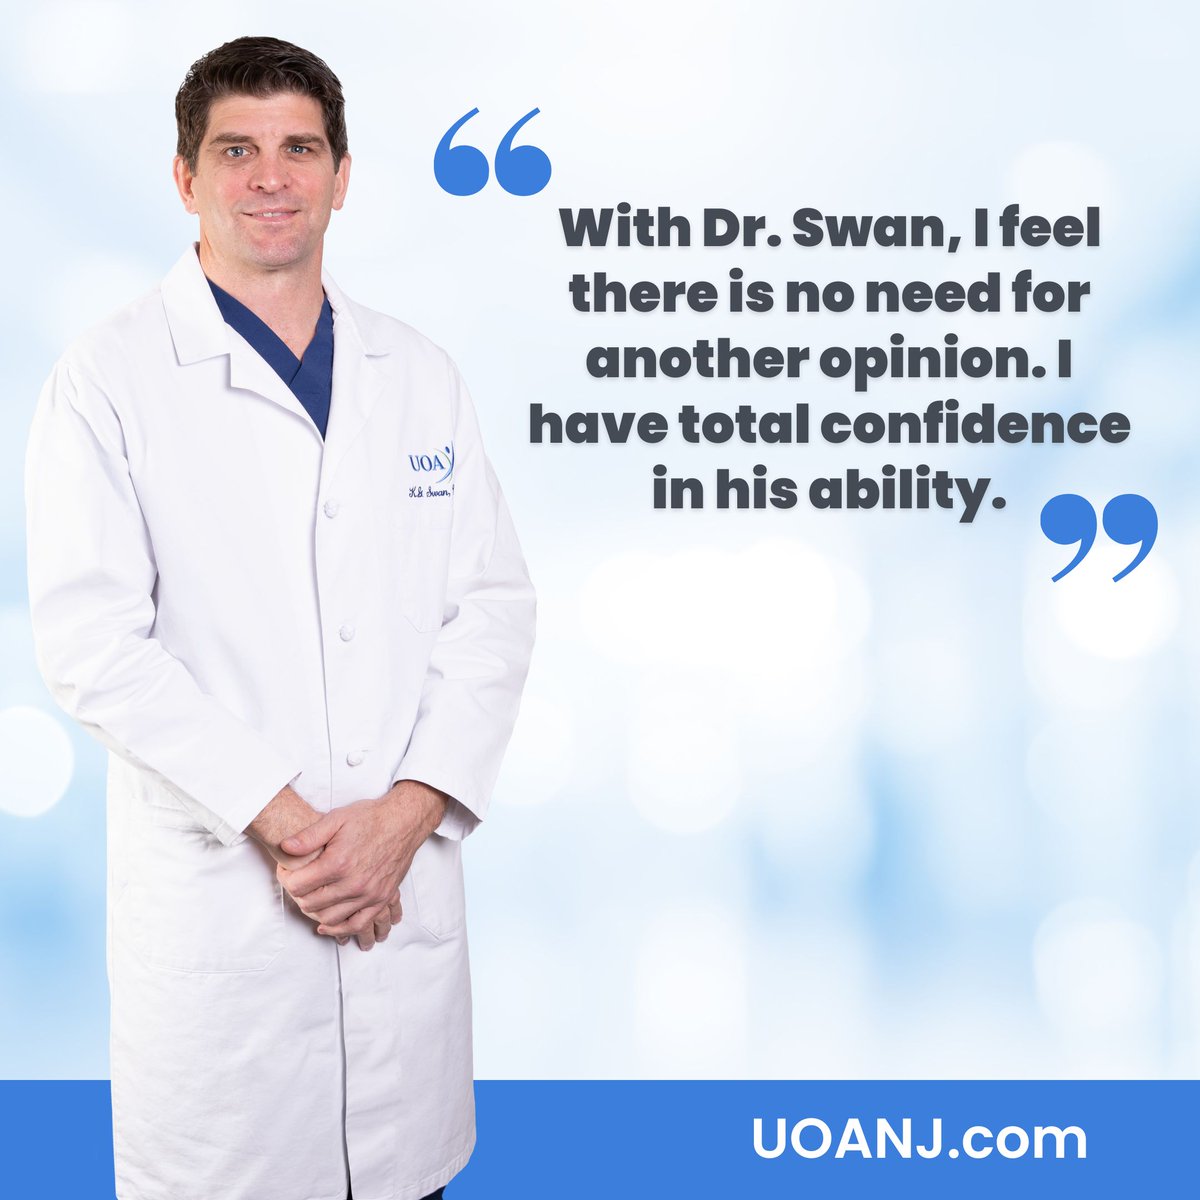 We love seeing our patients' success stories! Discover the amazing journeys of our patients on our website. bit.ly/3WGnAng  

#UOA #Orthopaedic #Orthopaedicsurgeon #Orthopaedicdoctor #SportsMedicine #testimonial #patienttestimonial